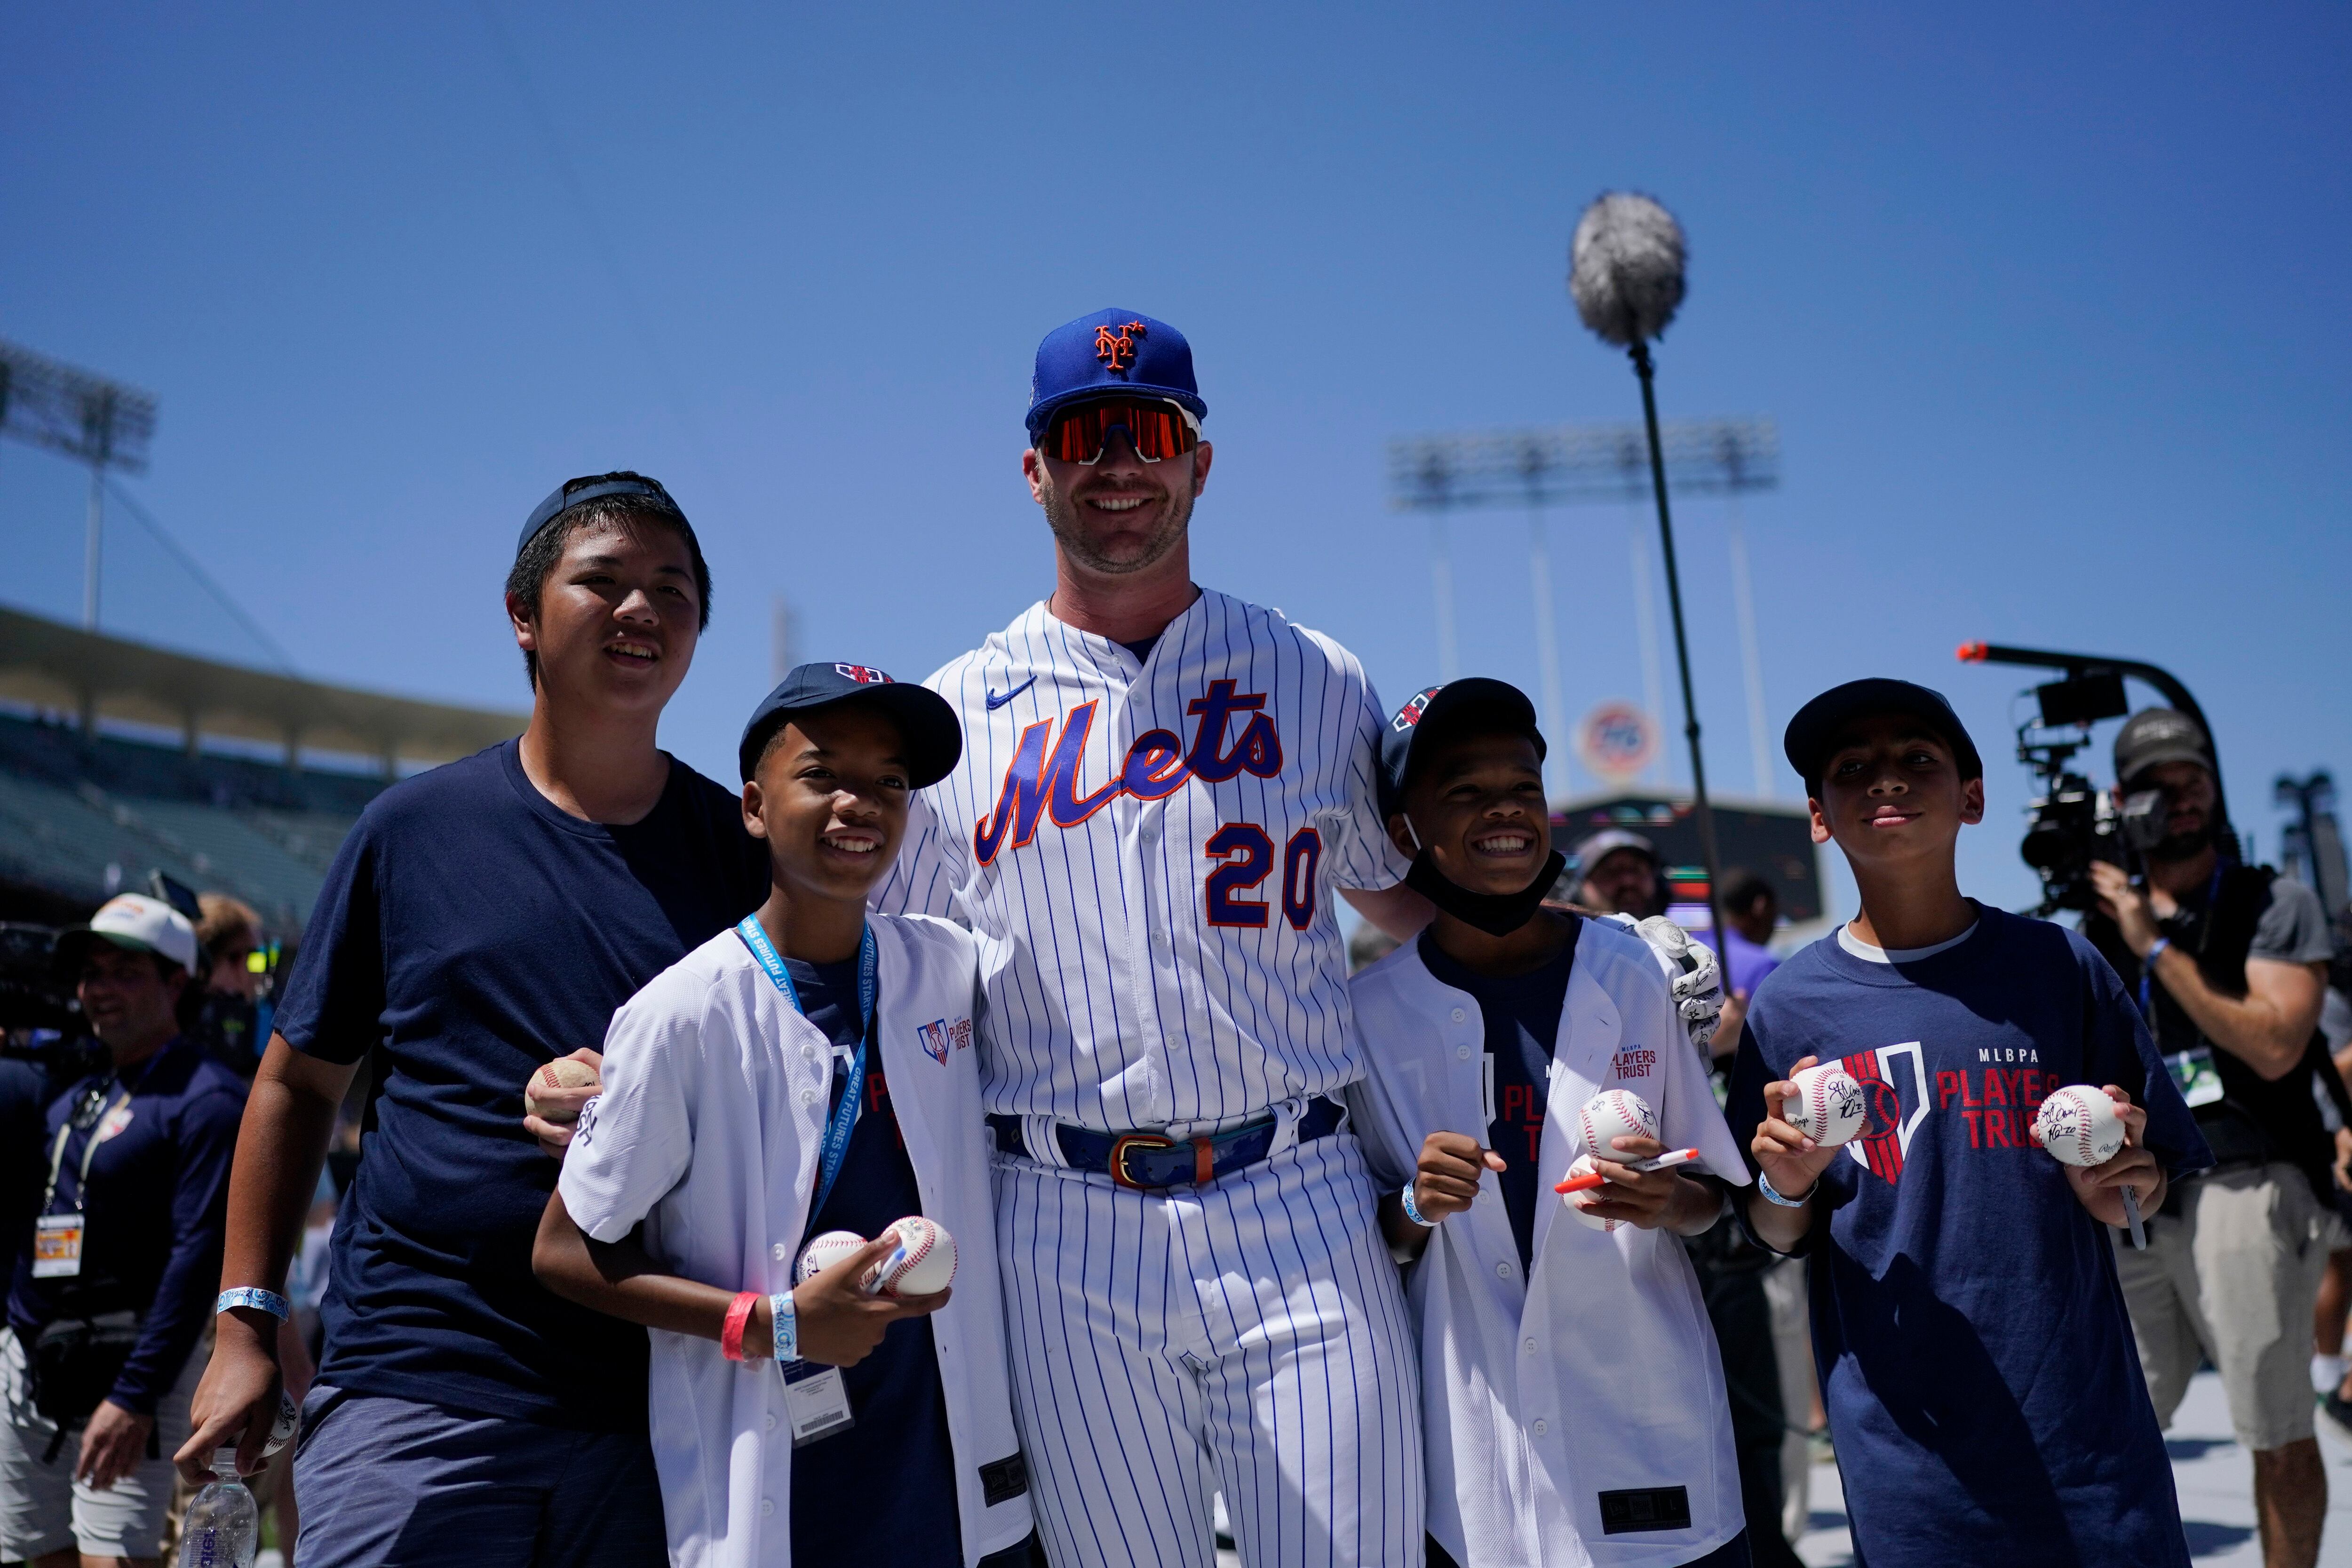 Photo: Mets' Pete Alonso wins MLB All-Star Home Run Derby in